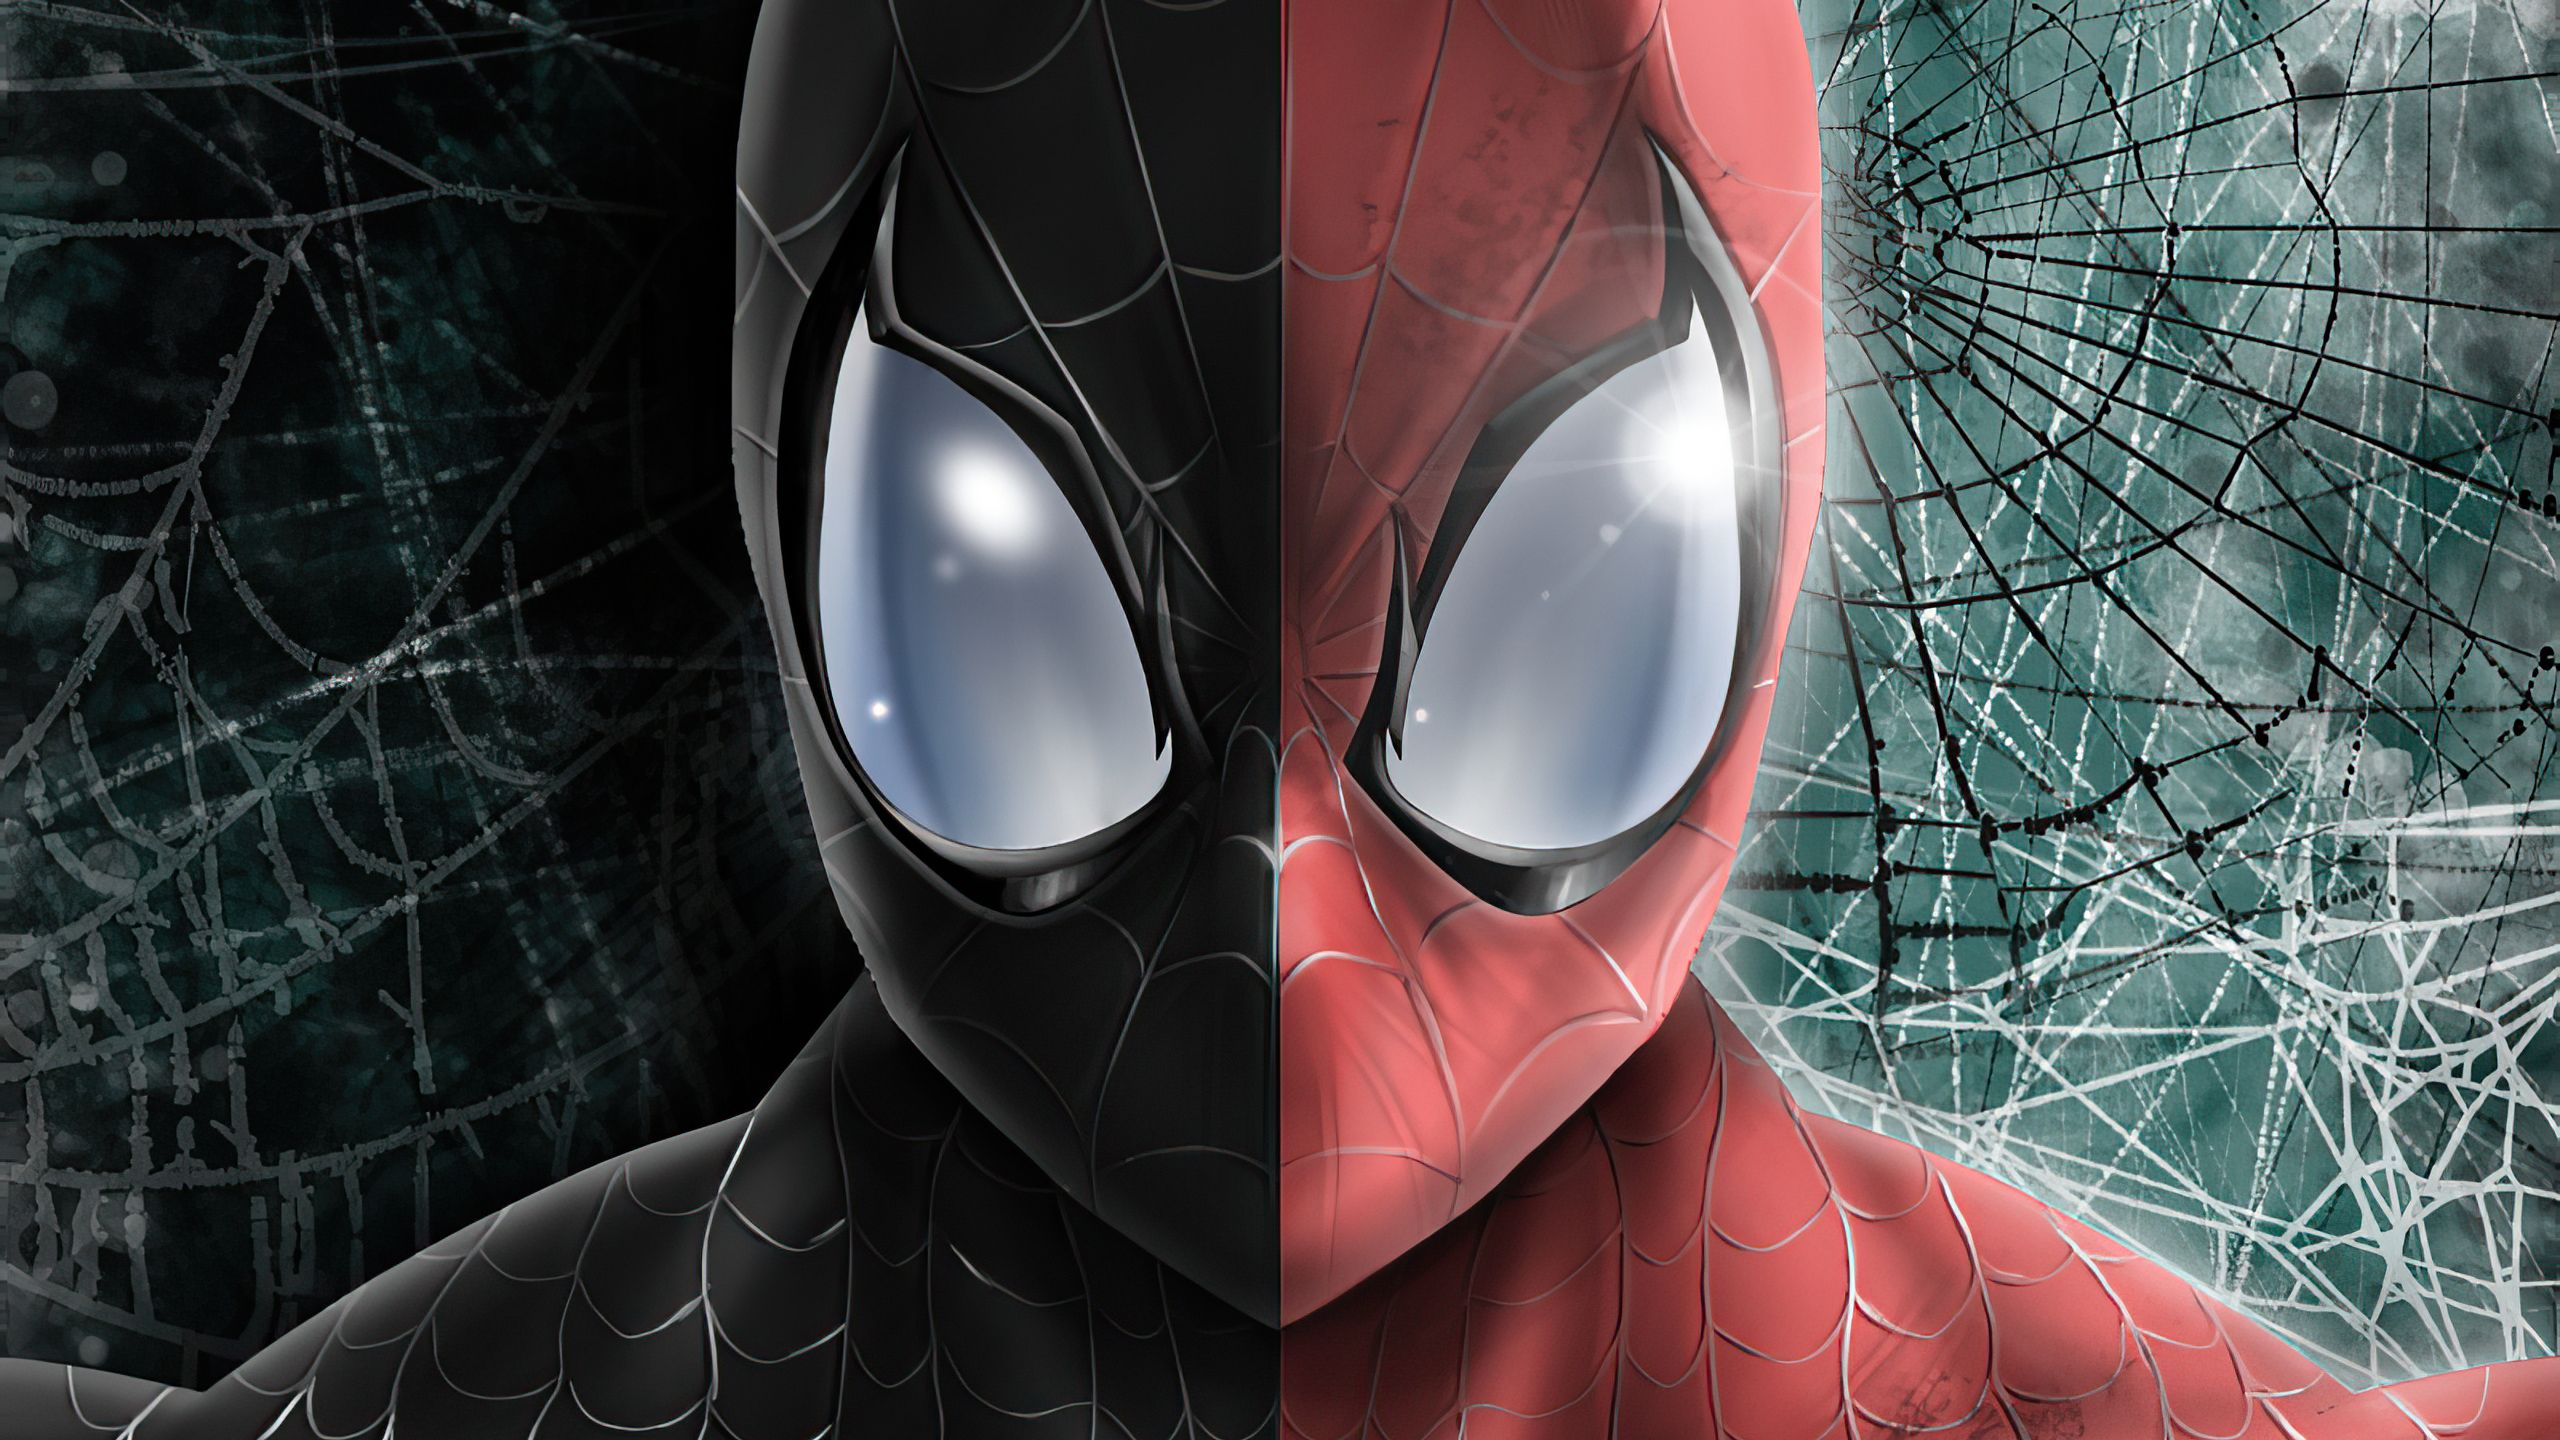 Spider Man Two Face Mask, HD Superheroes, 4k Wallpapers, Image, Backgrounds...